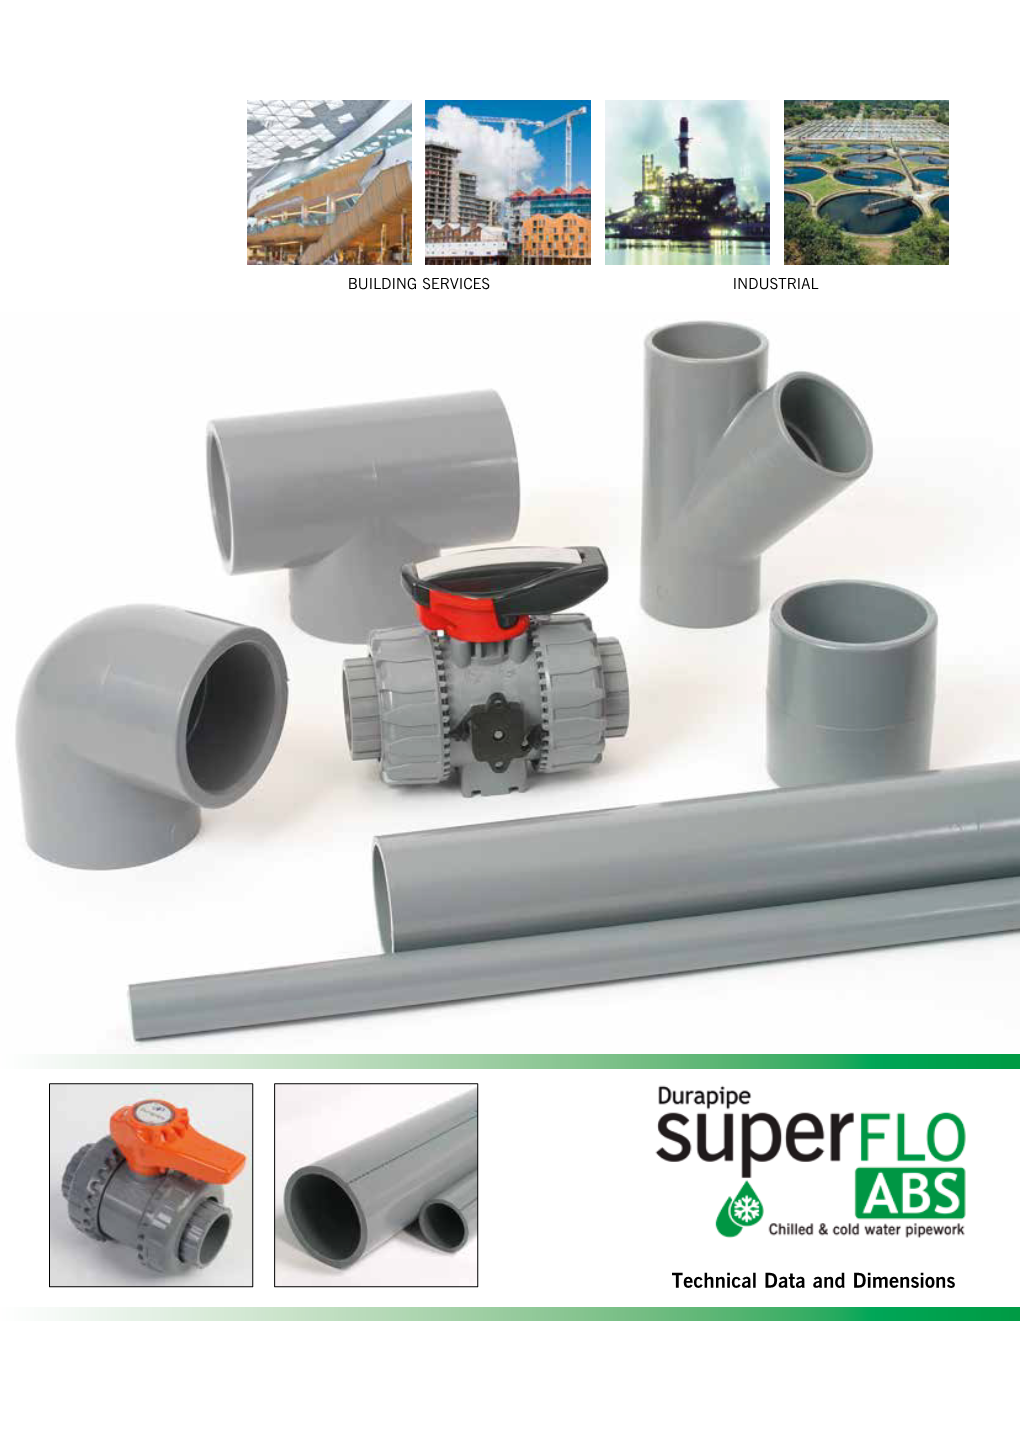 Durapipe Superflo ABS for Low Temperature Fluid Transportation